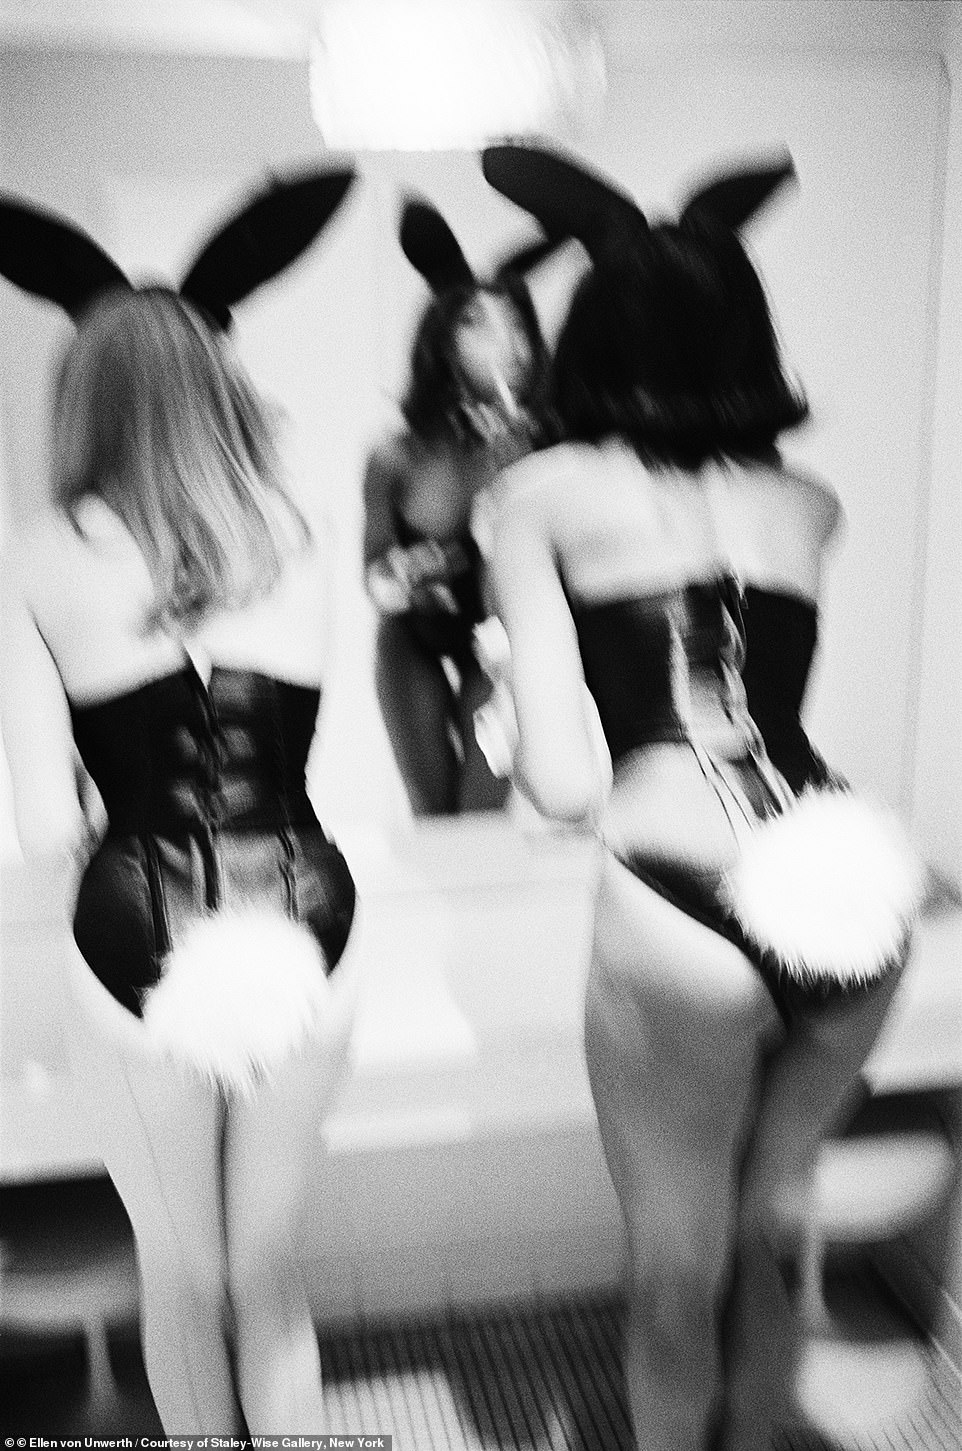 And in one image two Playboy bunnies are seen looking in a mirror and putting on makeup, with their butts front and center.